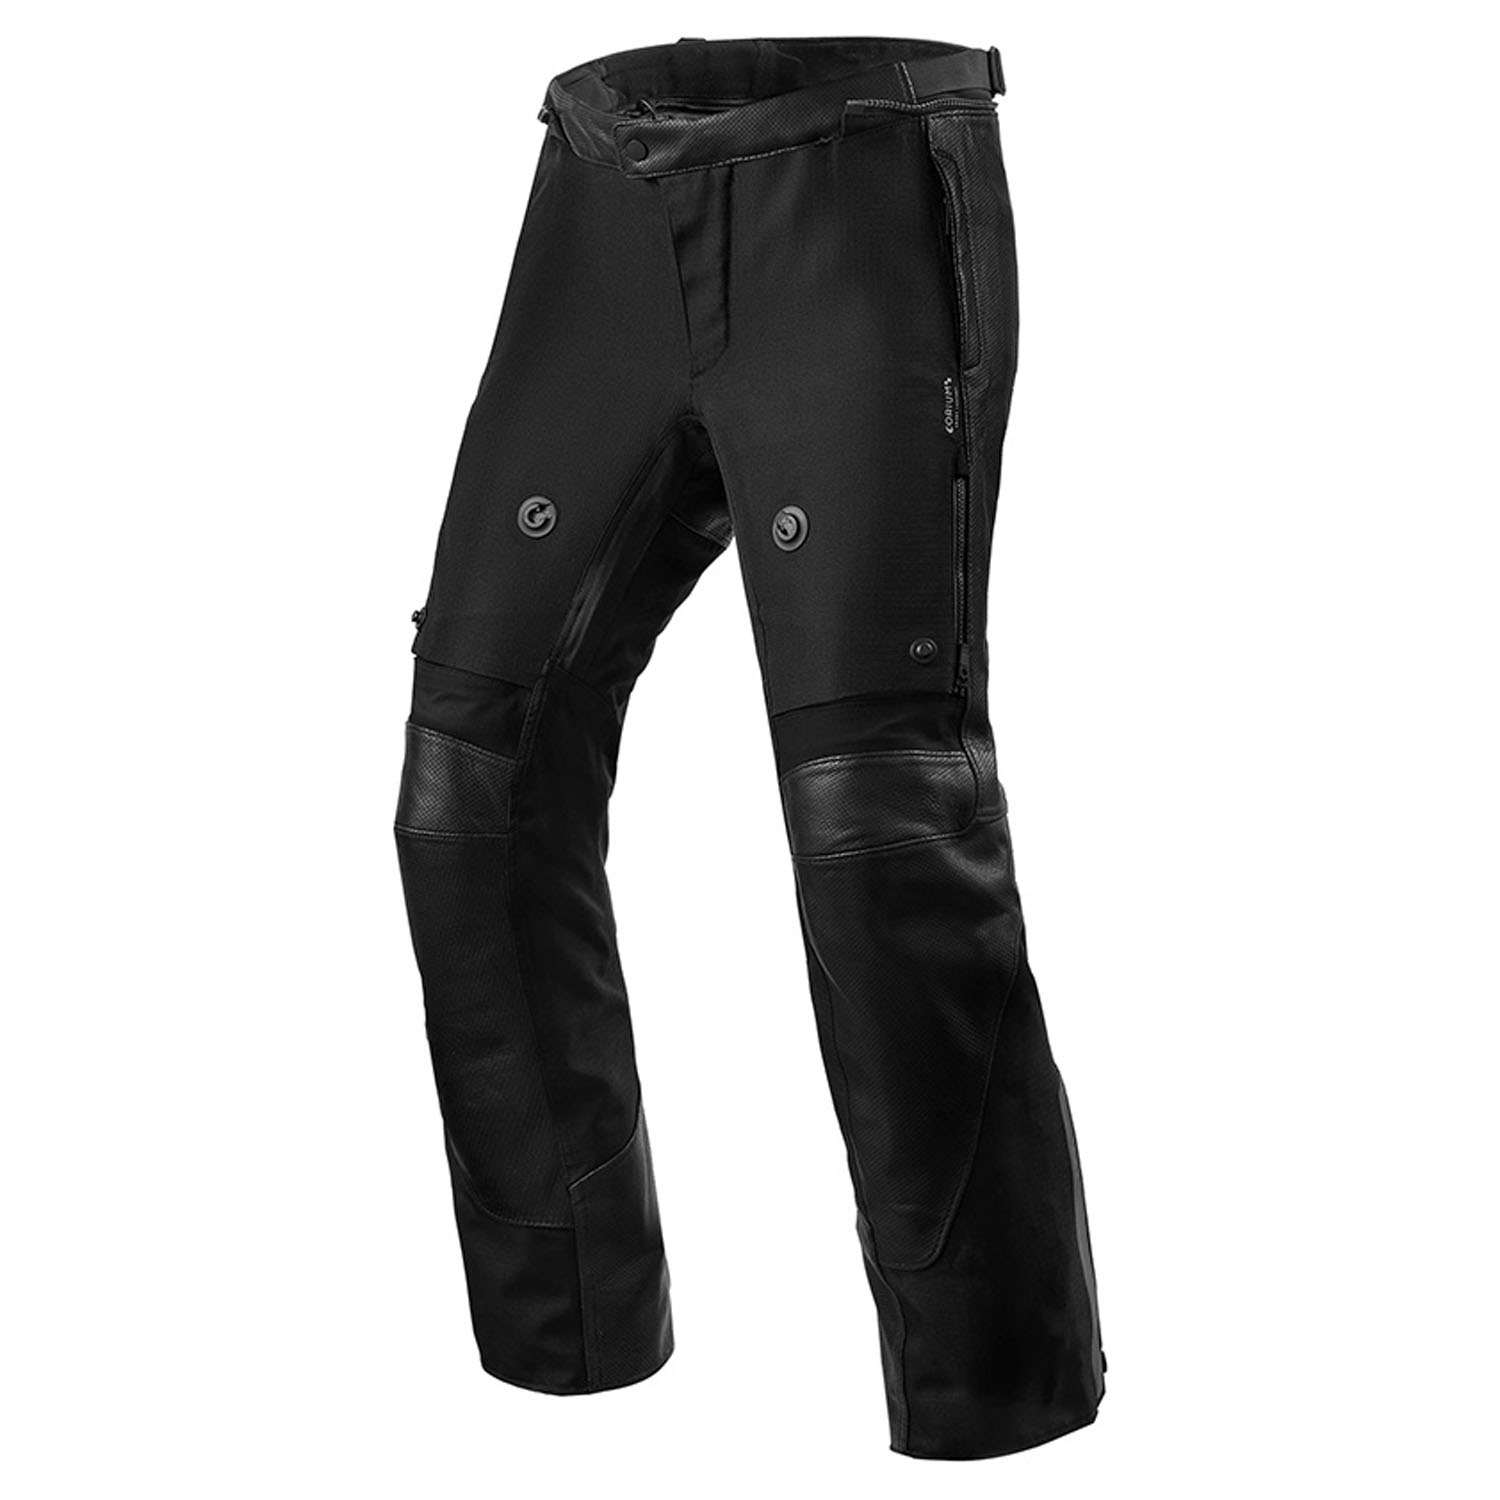 Image of REV'IT! Trousers Valve H2O Black Short Motorcycle Pants Taille 50